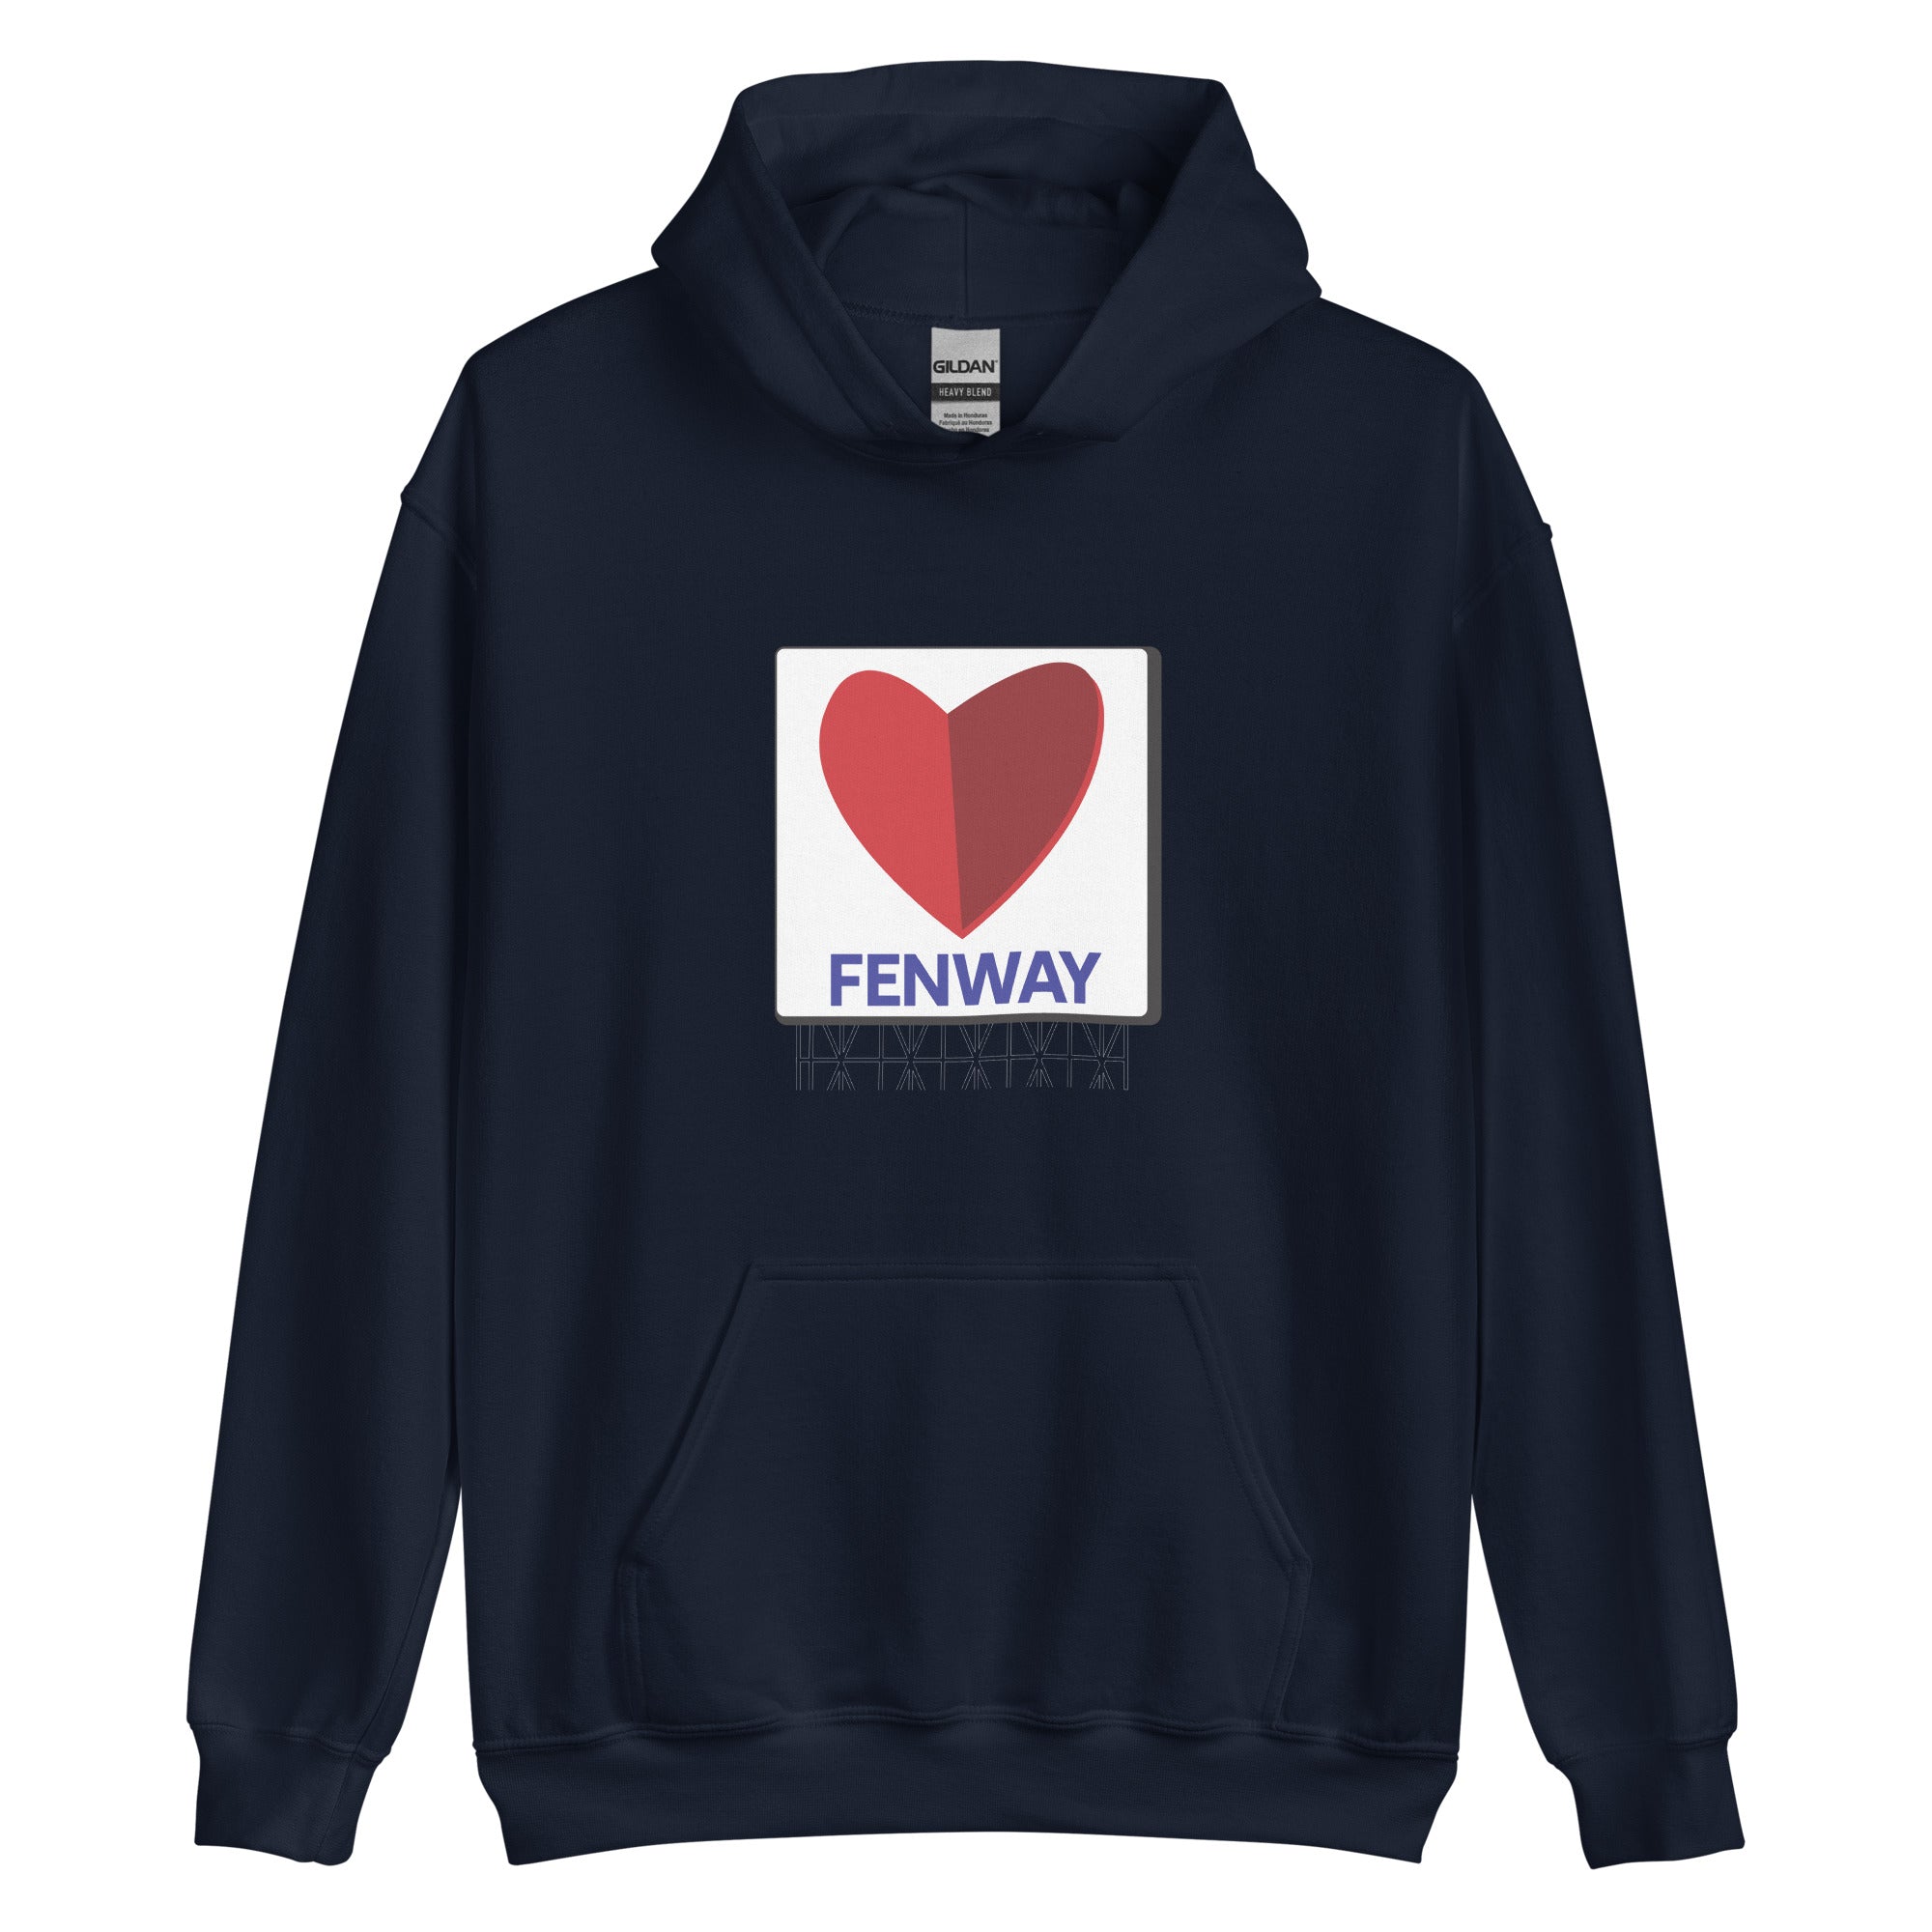 unisex navy hoodie with graphic of the citgo sign boston fenway as a heart